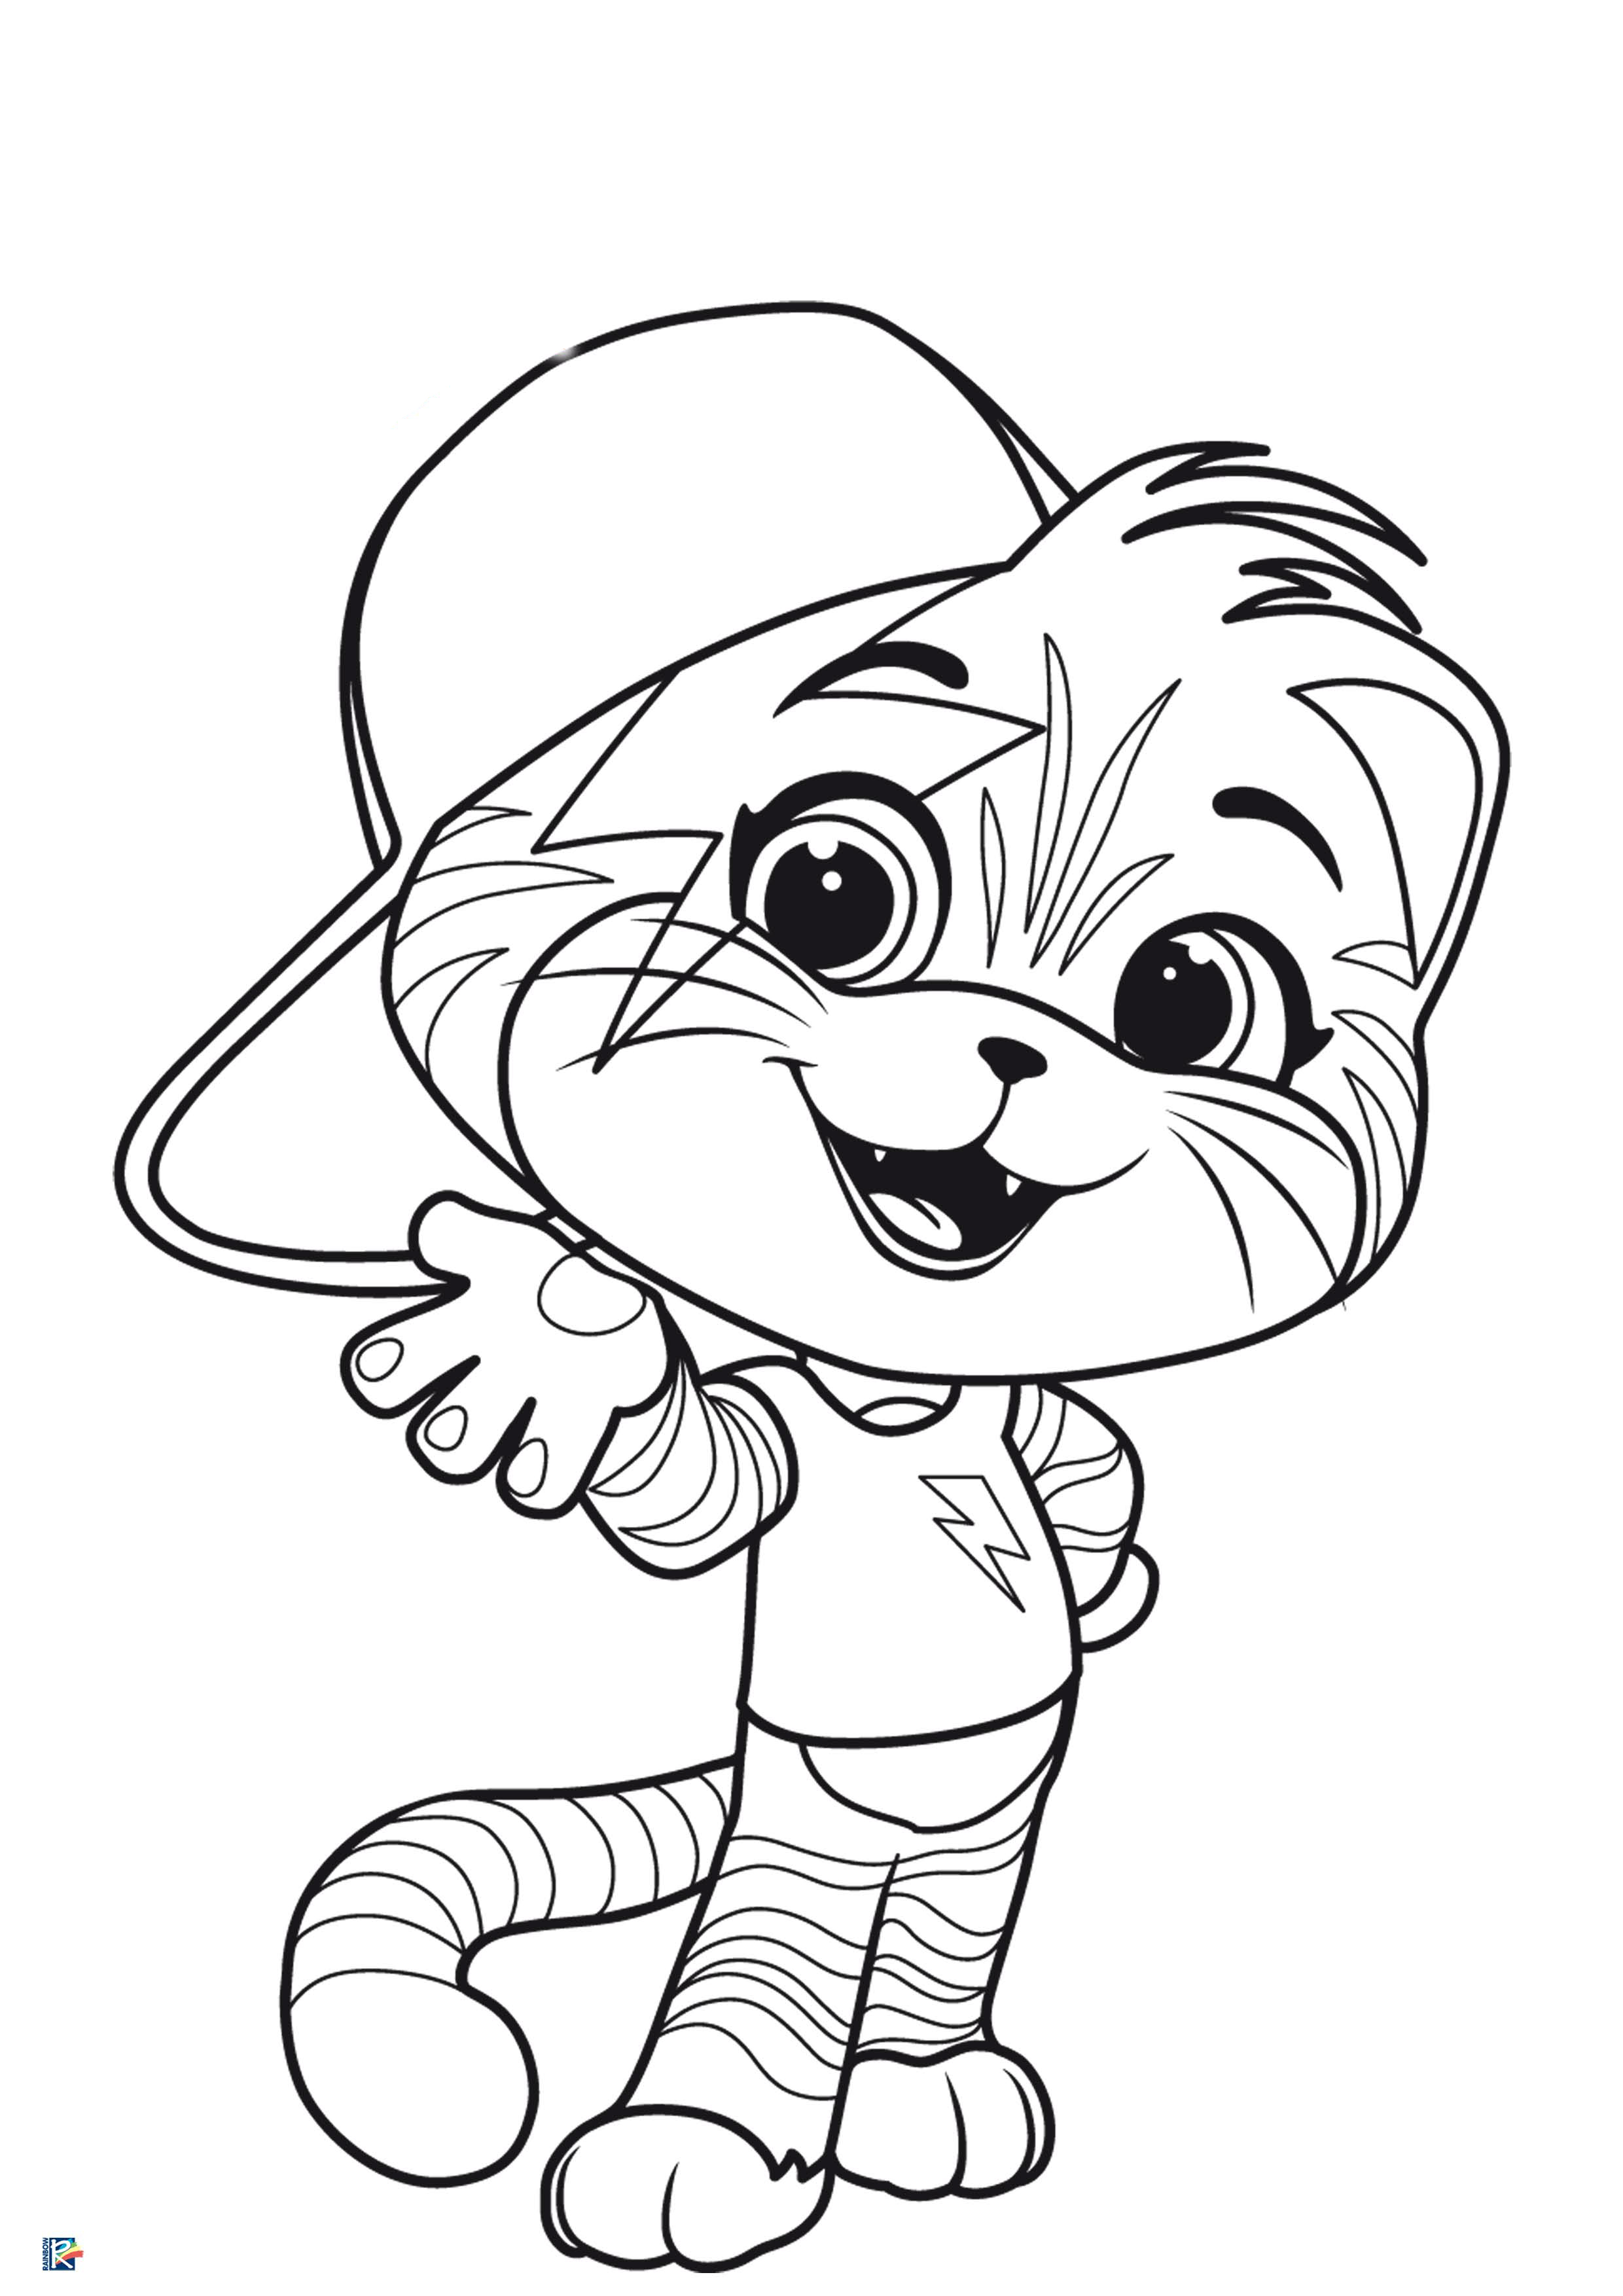 Free 44 Cats Coloring Pages - Youloveit.com 95B